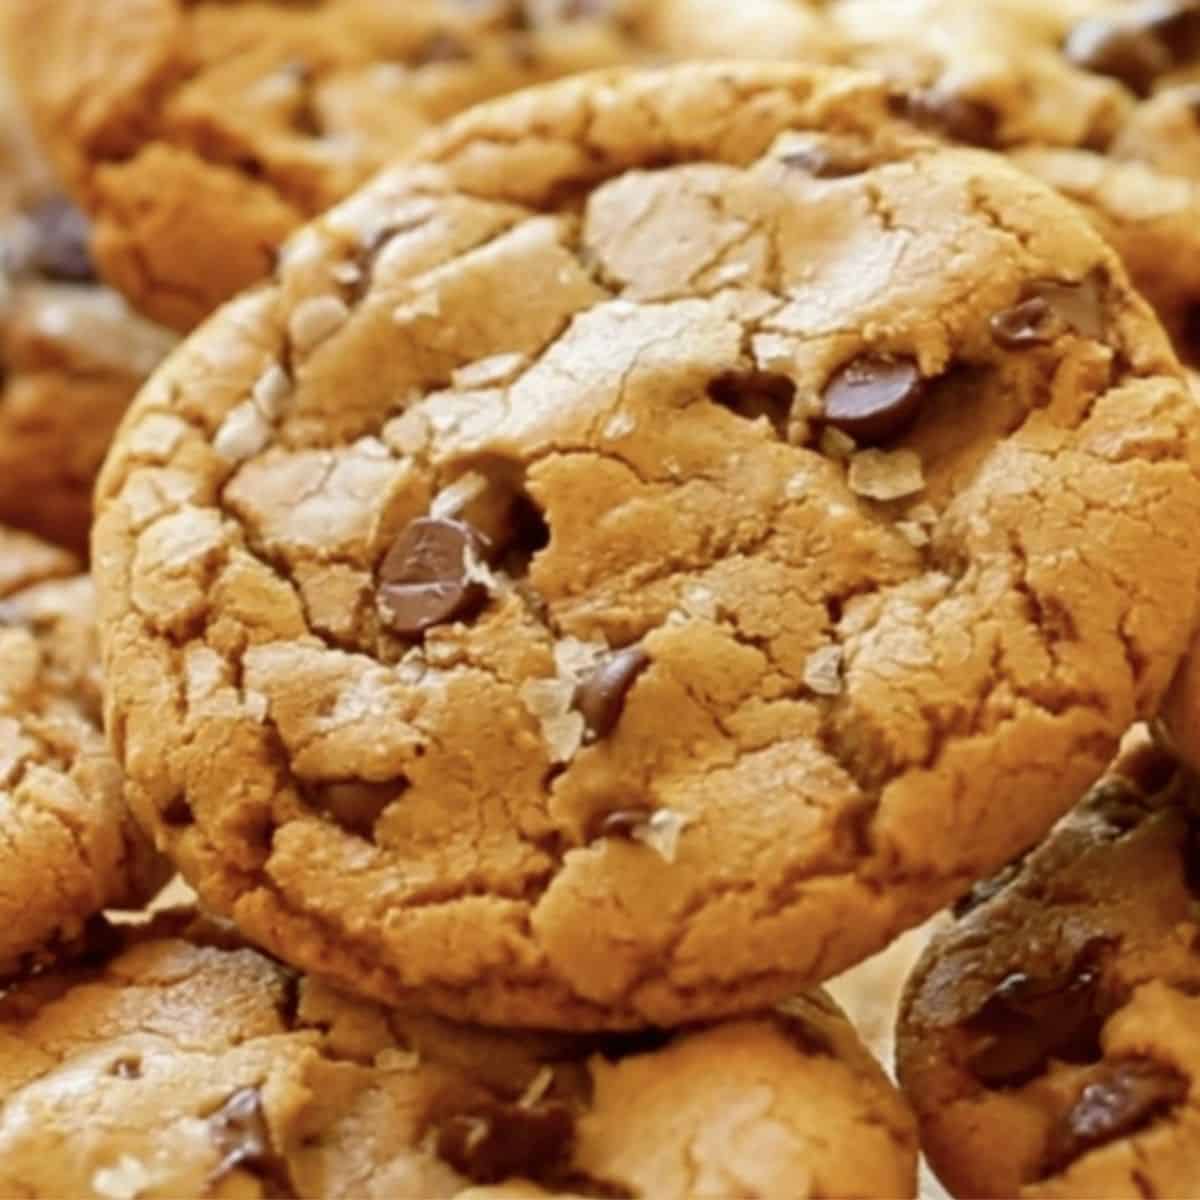 Brown Butter Chocolate Chip Cookies with Sea Salt